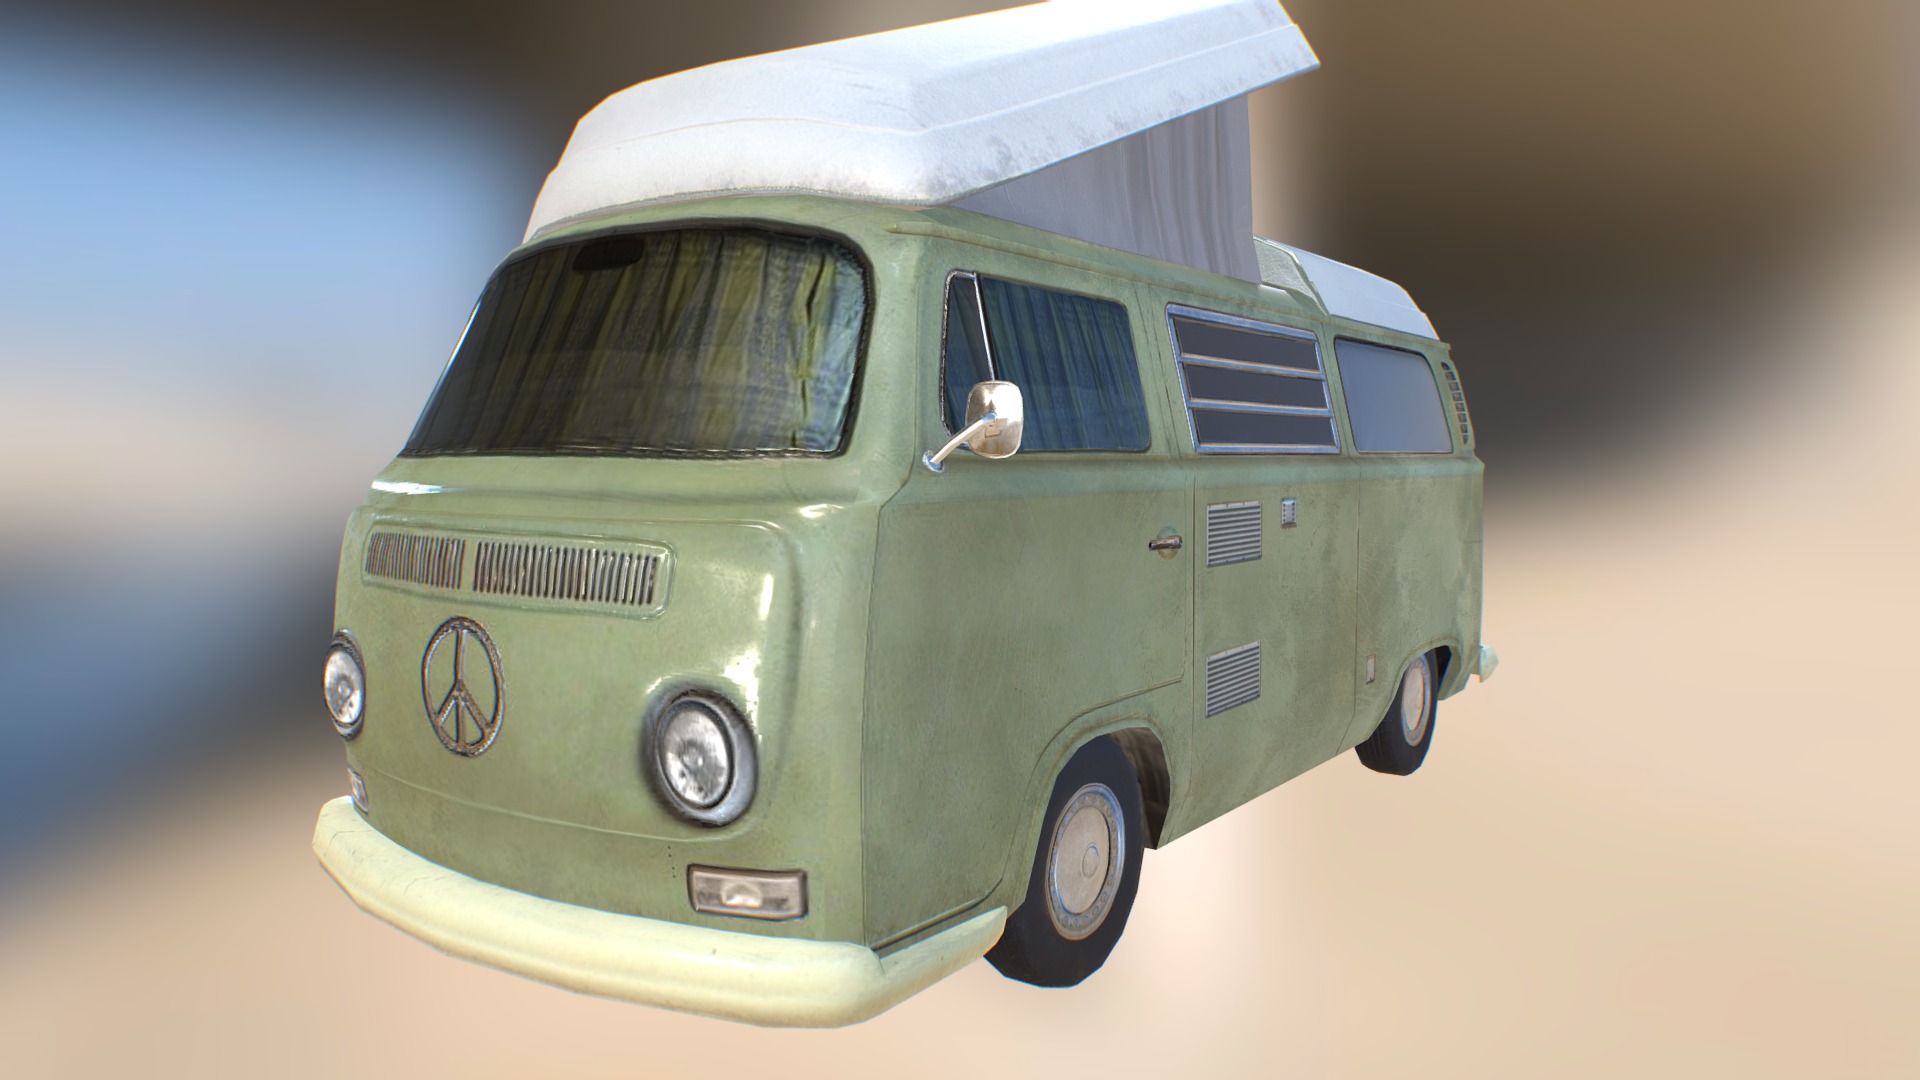 3D model VW T2 Caravan lowpoly model - This is a 3D model of the VW T2 Caravan lowpoly model. The 3D model is about a green van with a white roof.